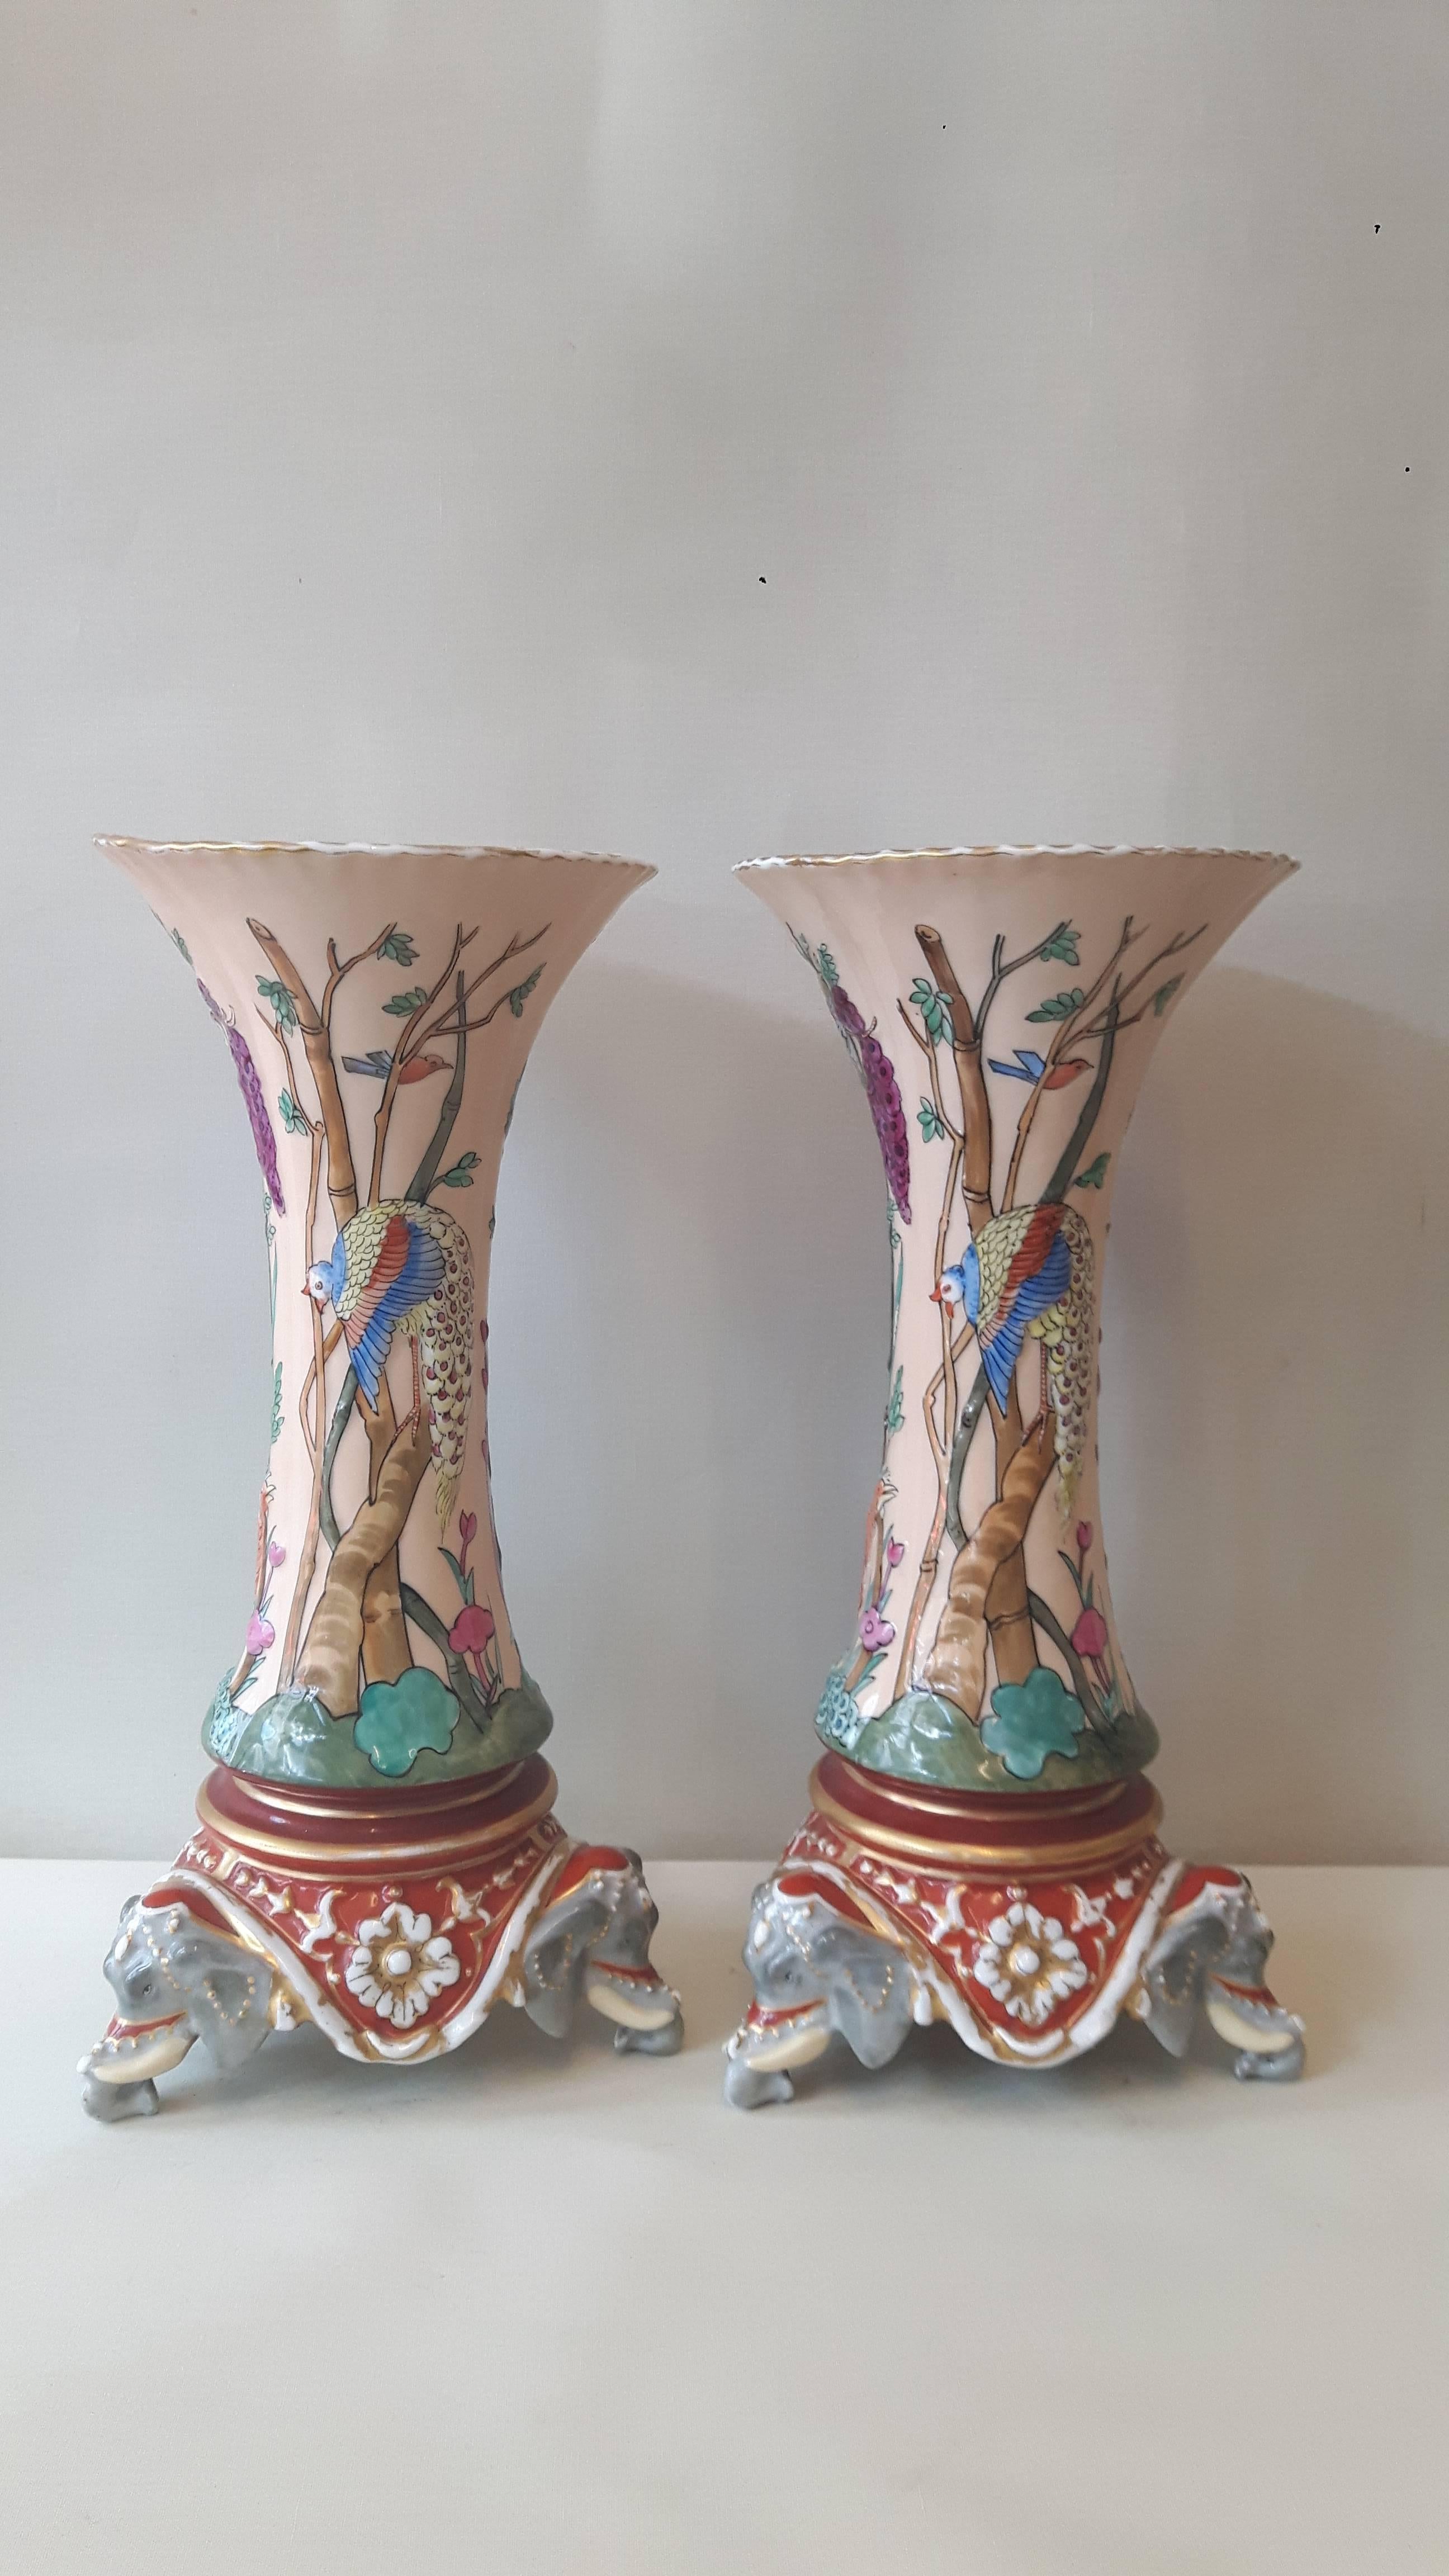 An extremely unusual pair of Paris porcelain trumpet-shaped vases in the C18 Mogul Indian style, hand-decorated with exotic birds in trees and foliage, the body sitting on porcelain elephant heads,
French.